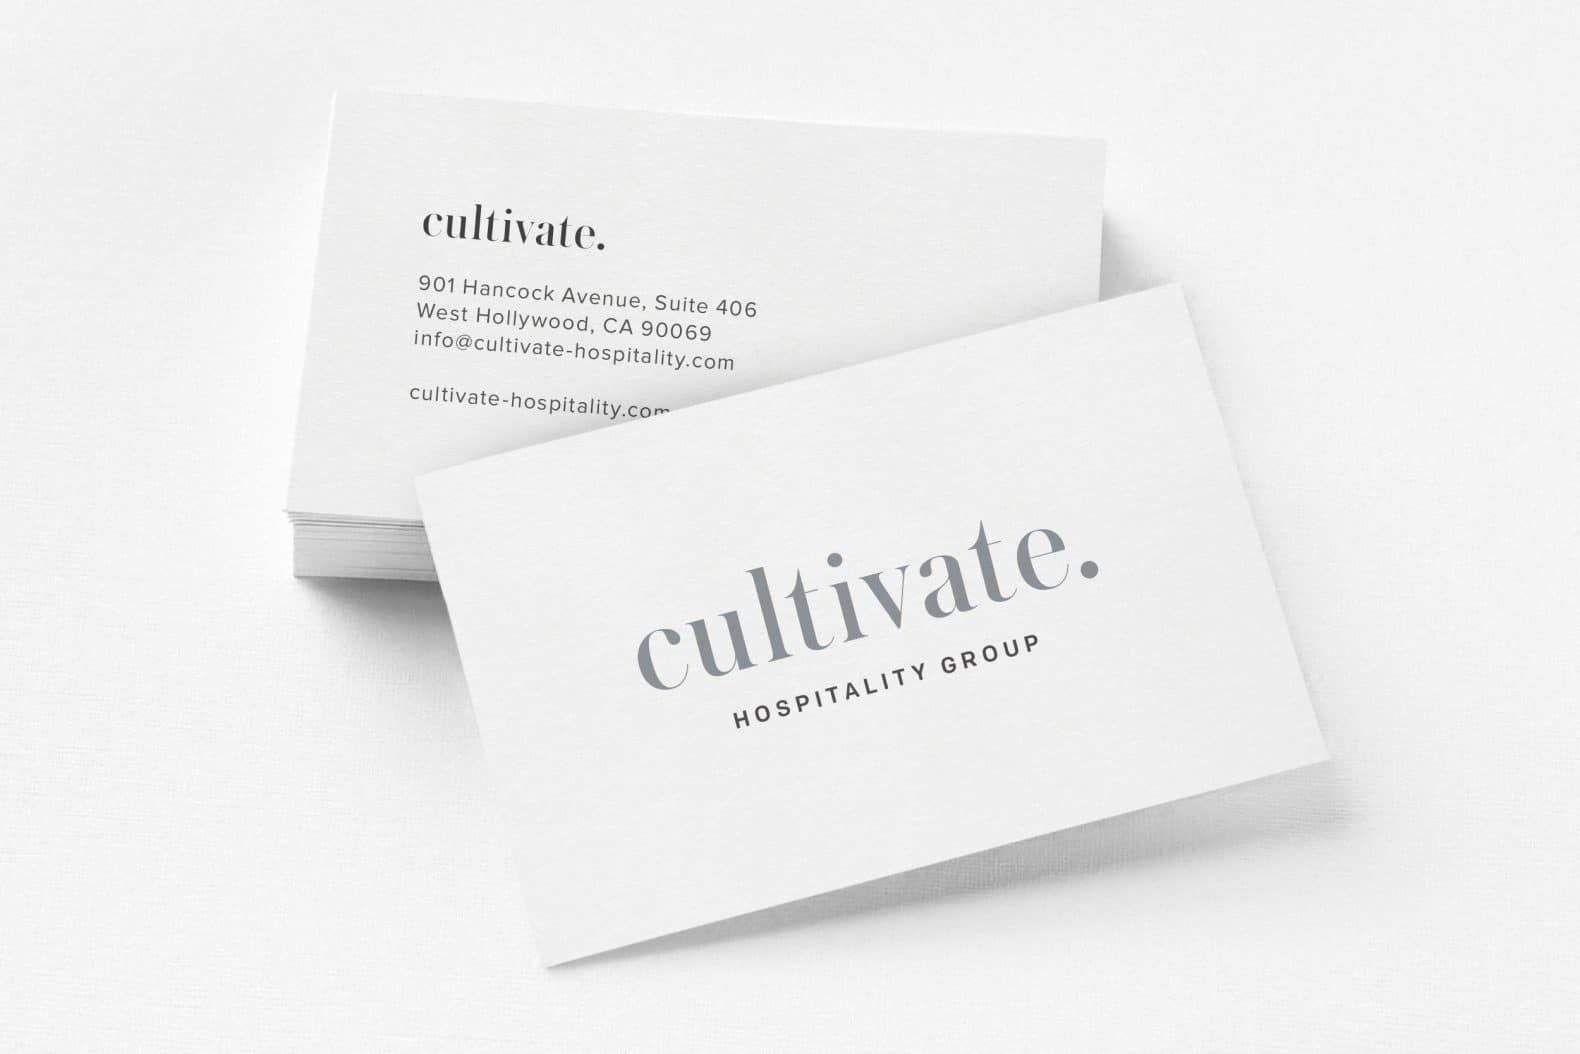 CULTIVATE HOSPITALITY GROUP